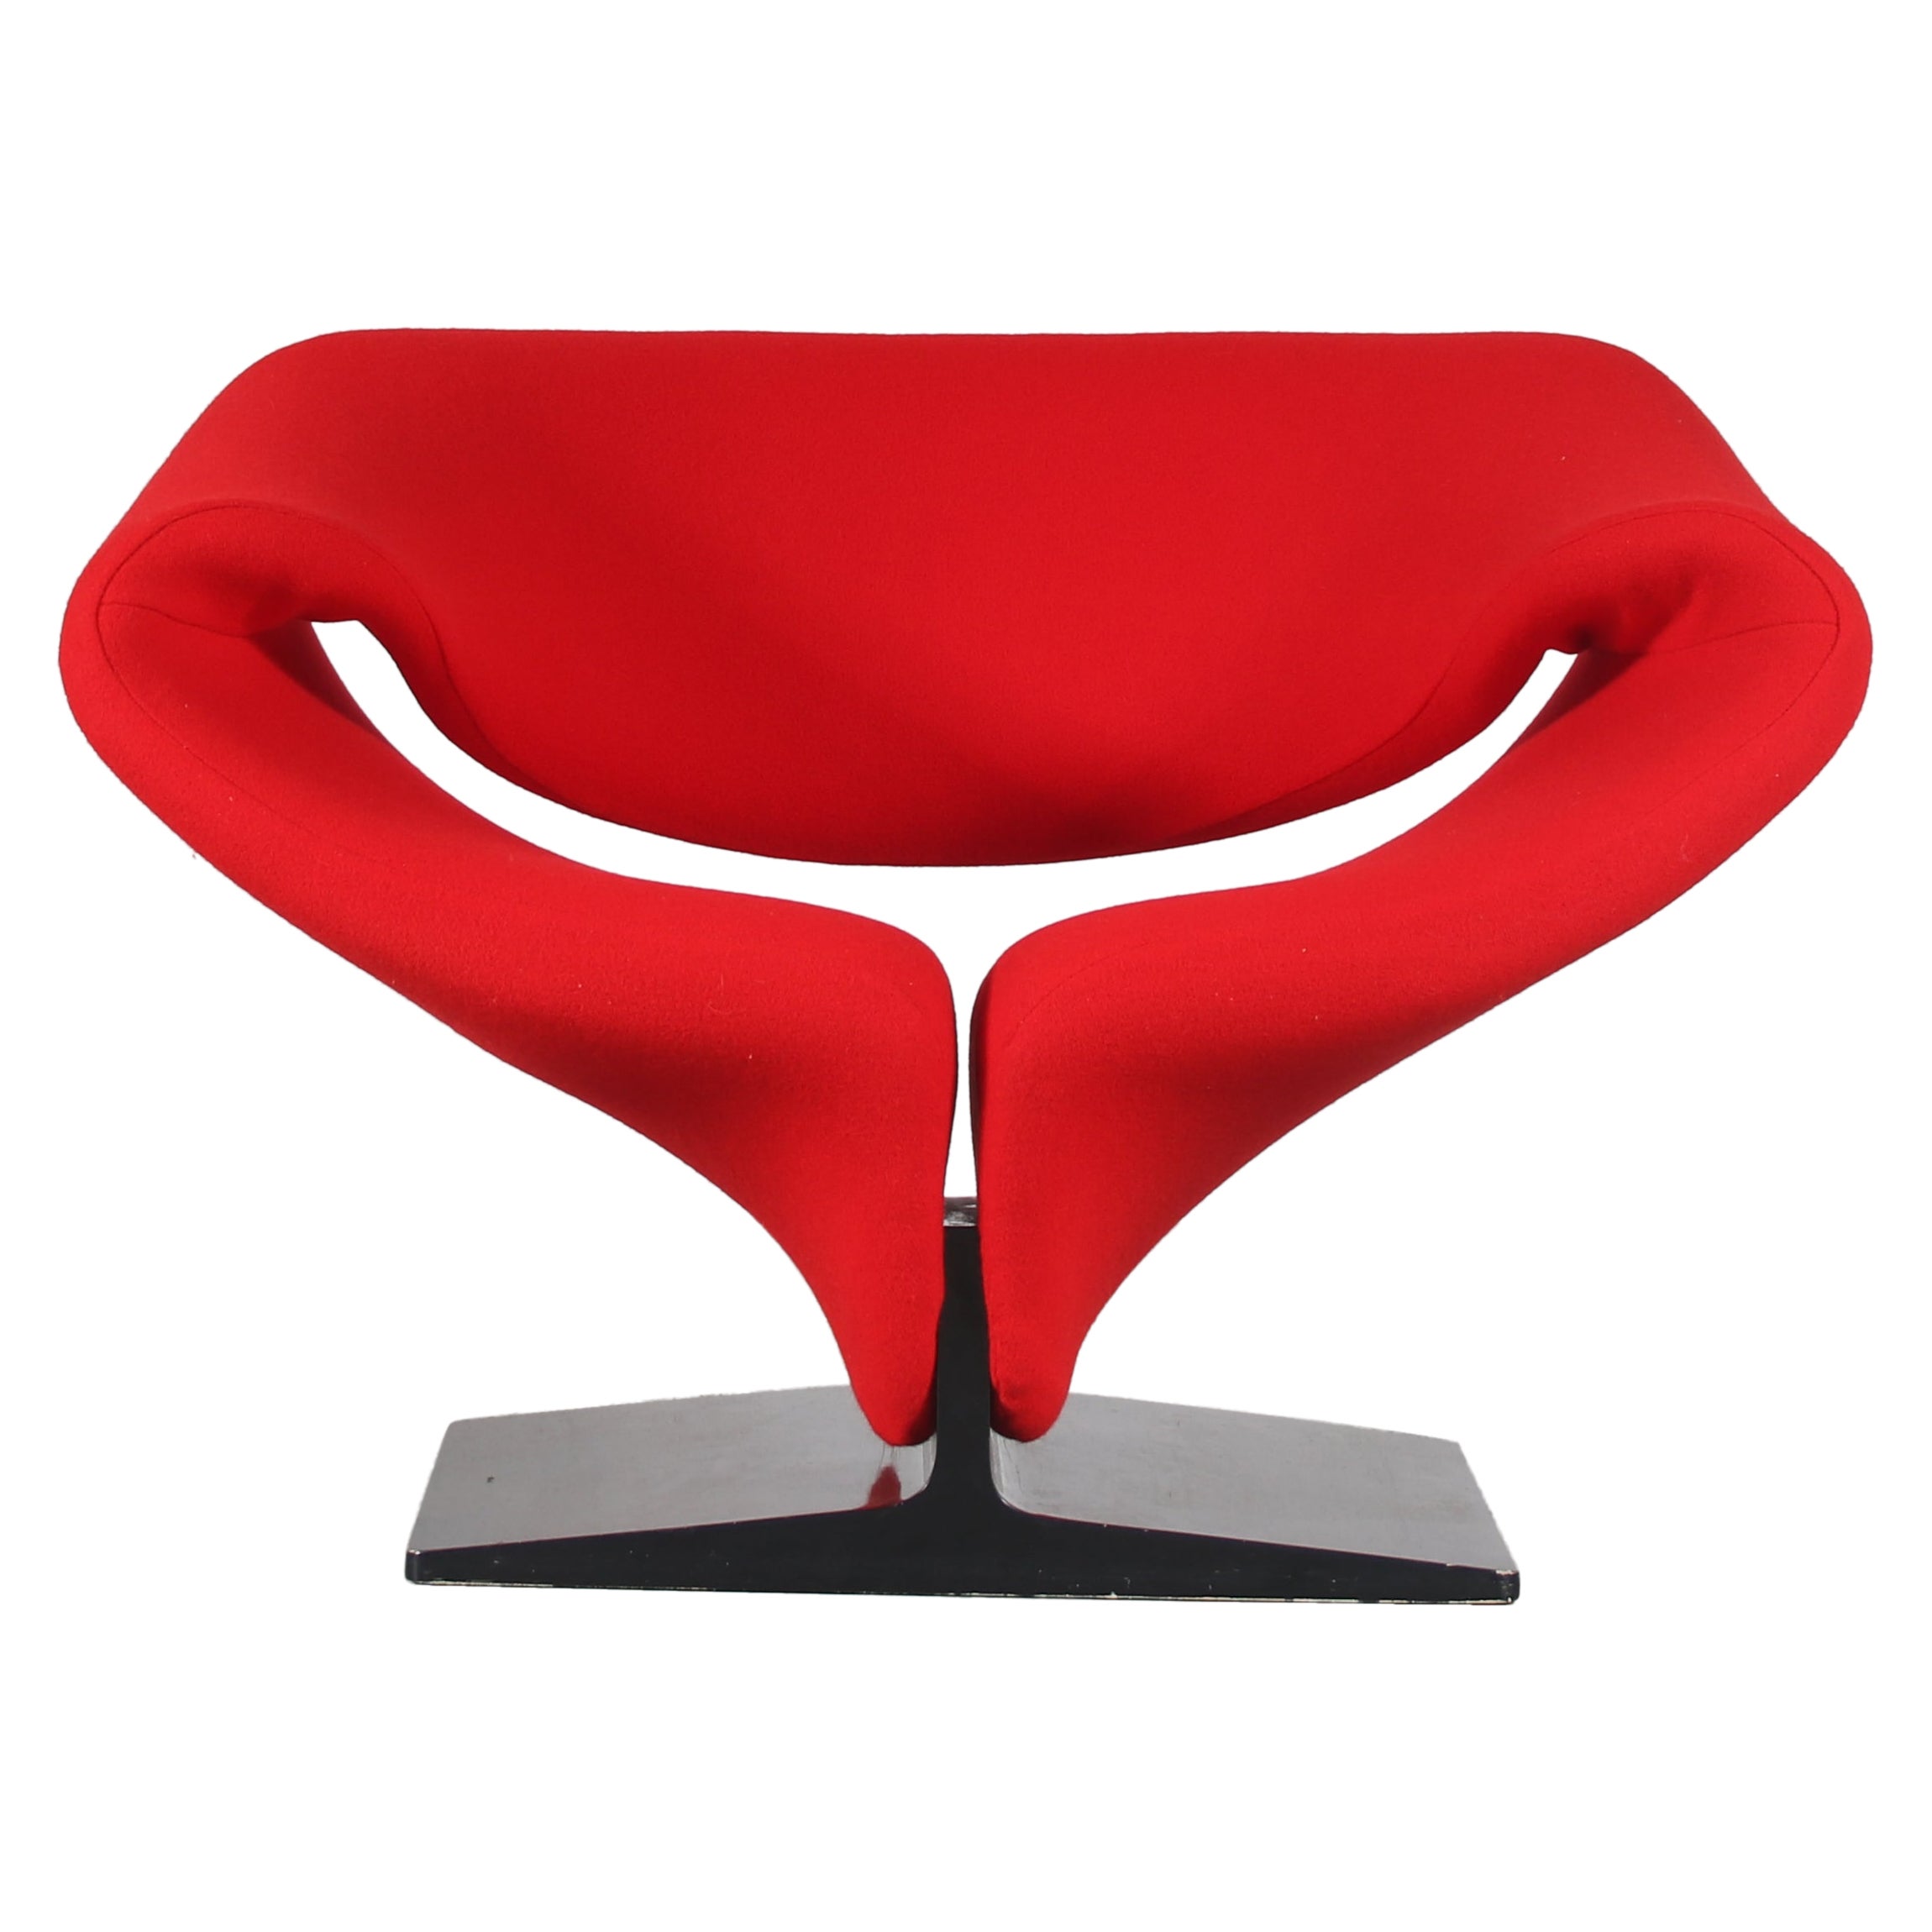 Ribbon” Chair by Pierre Paulin for Artifort, Netherlands 1970 at 1stDibs